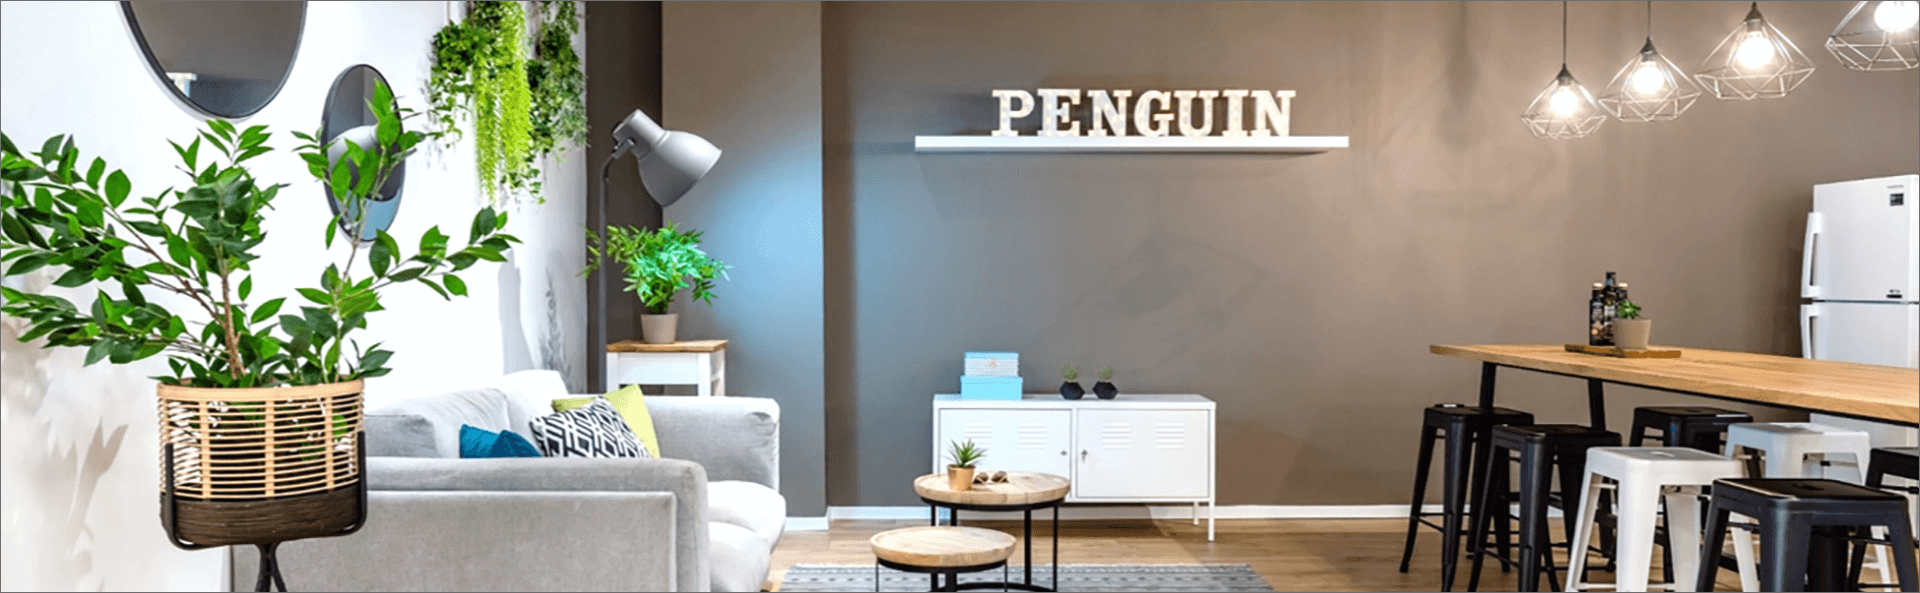 penguin-offices